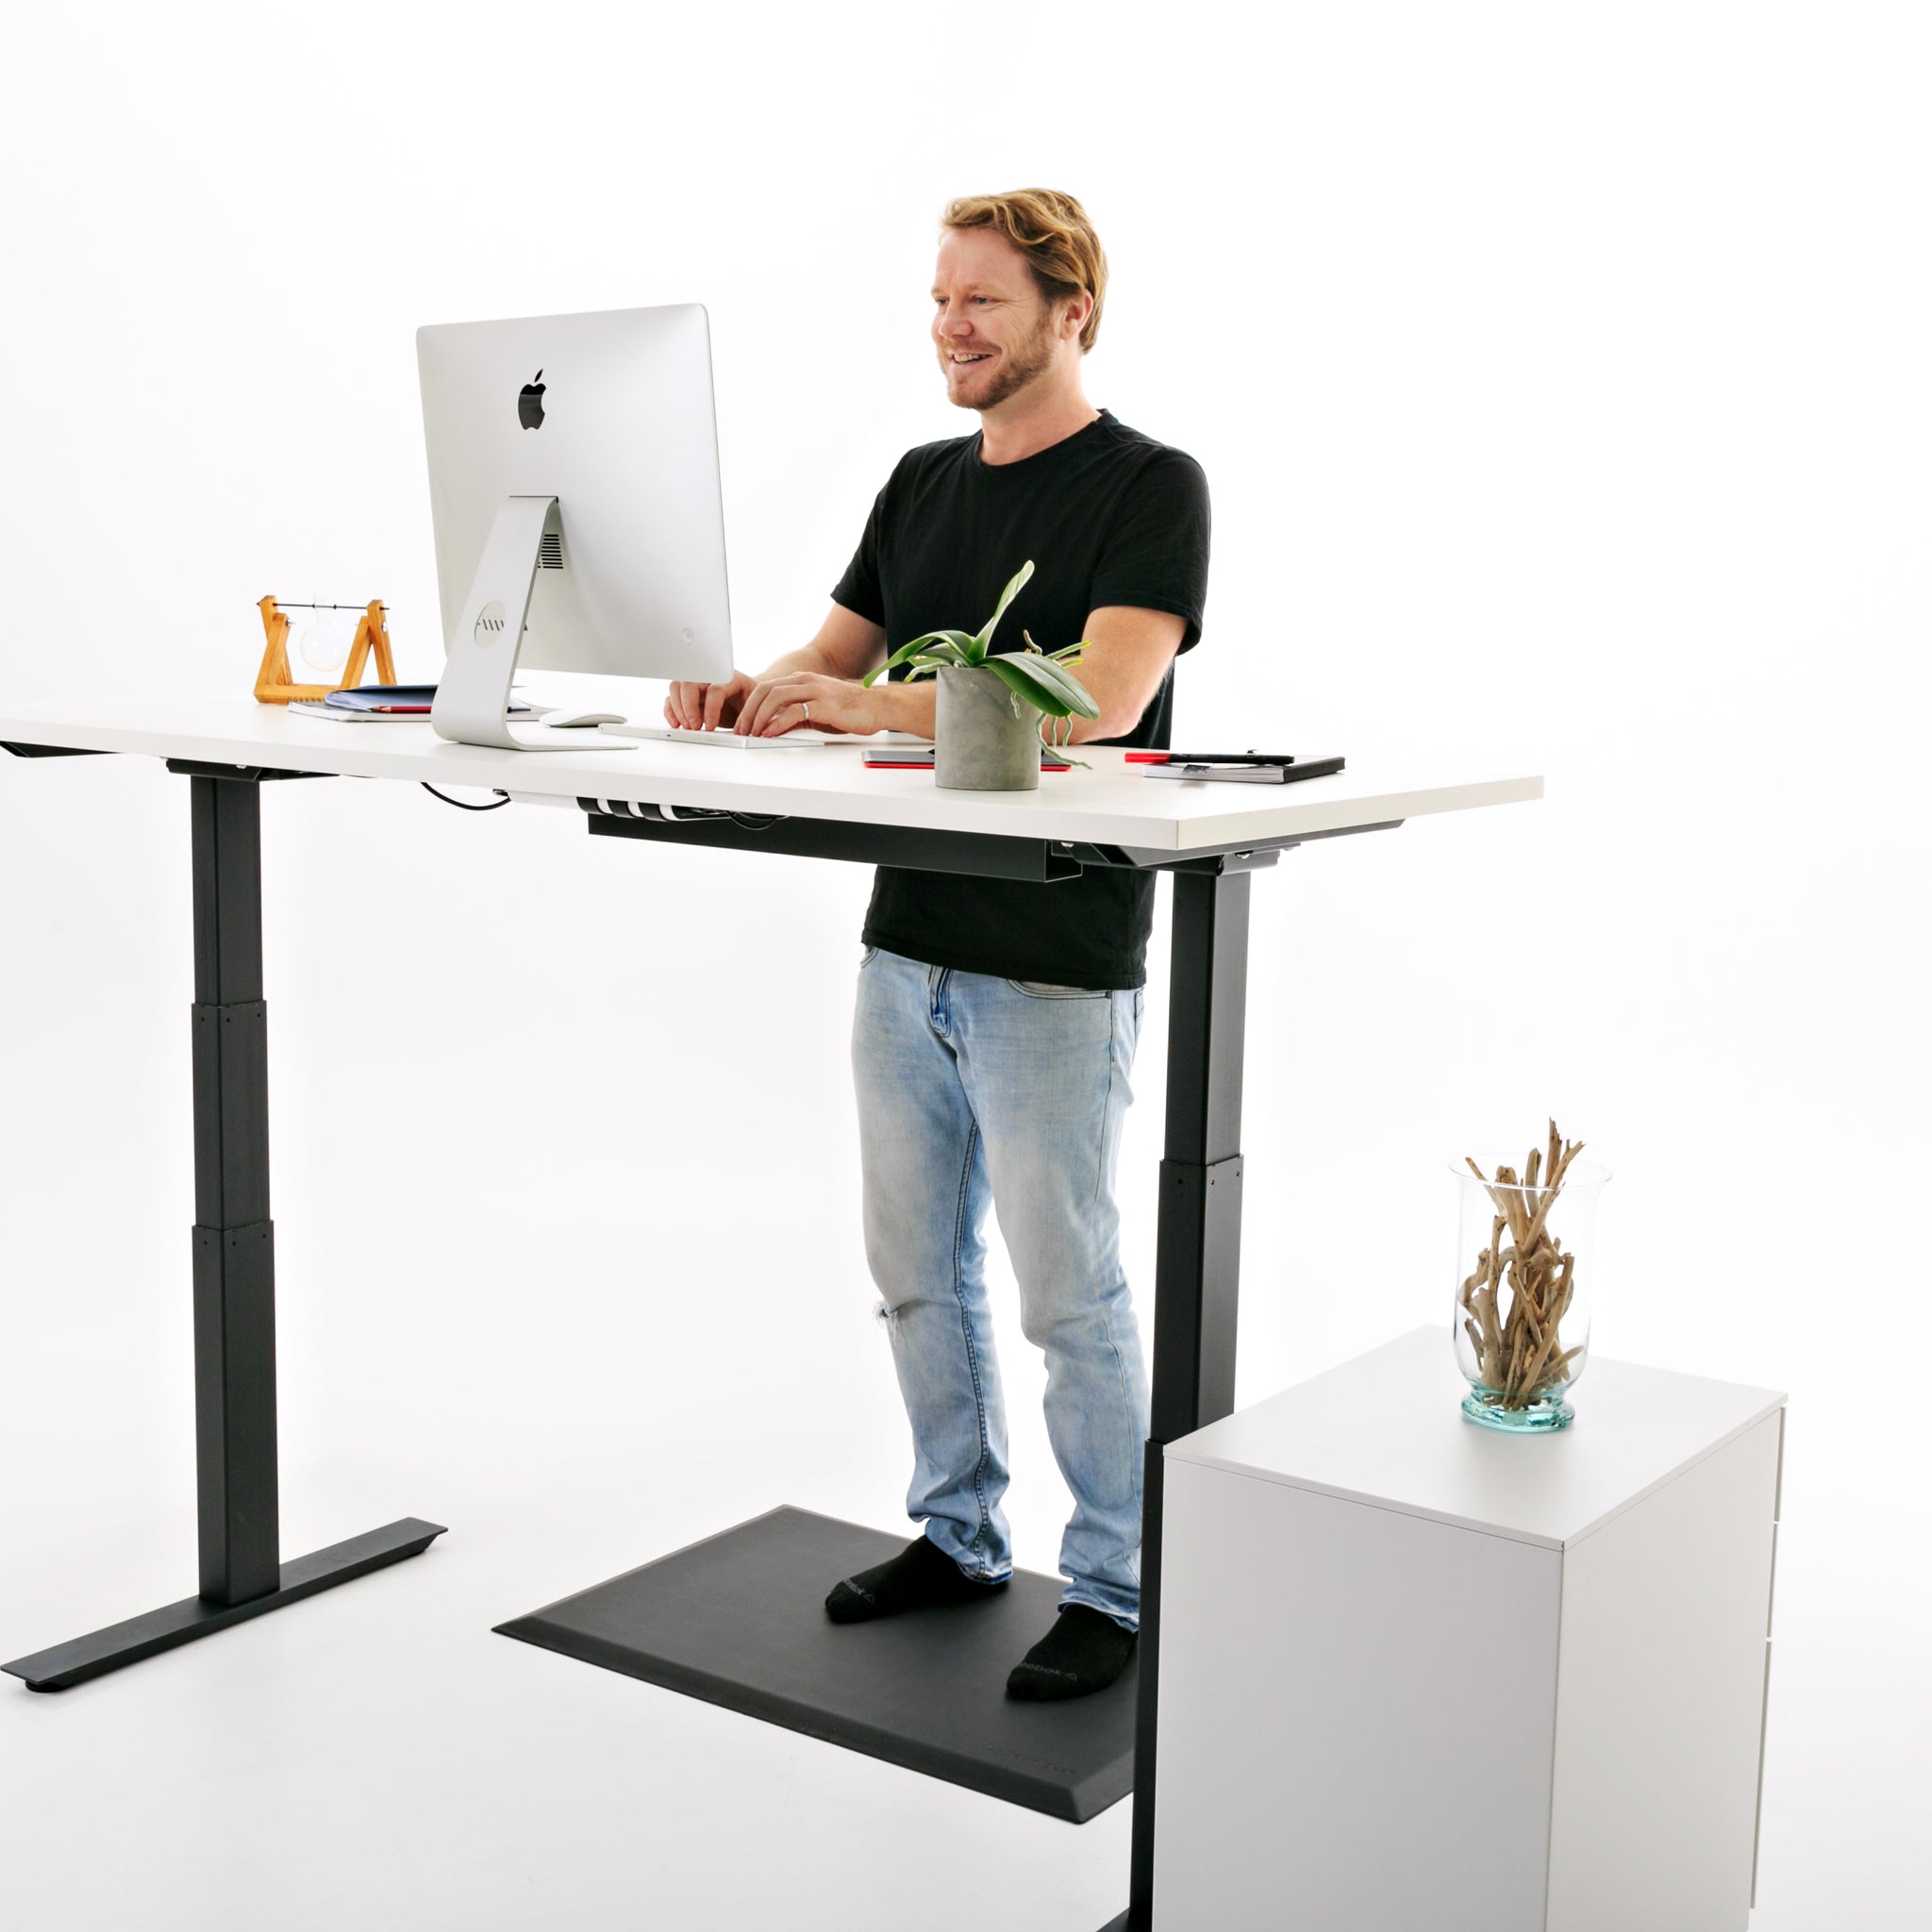 5 Tips to Help You Get Used to a Standing Desk & Avoid Injuries